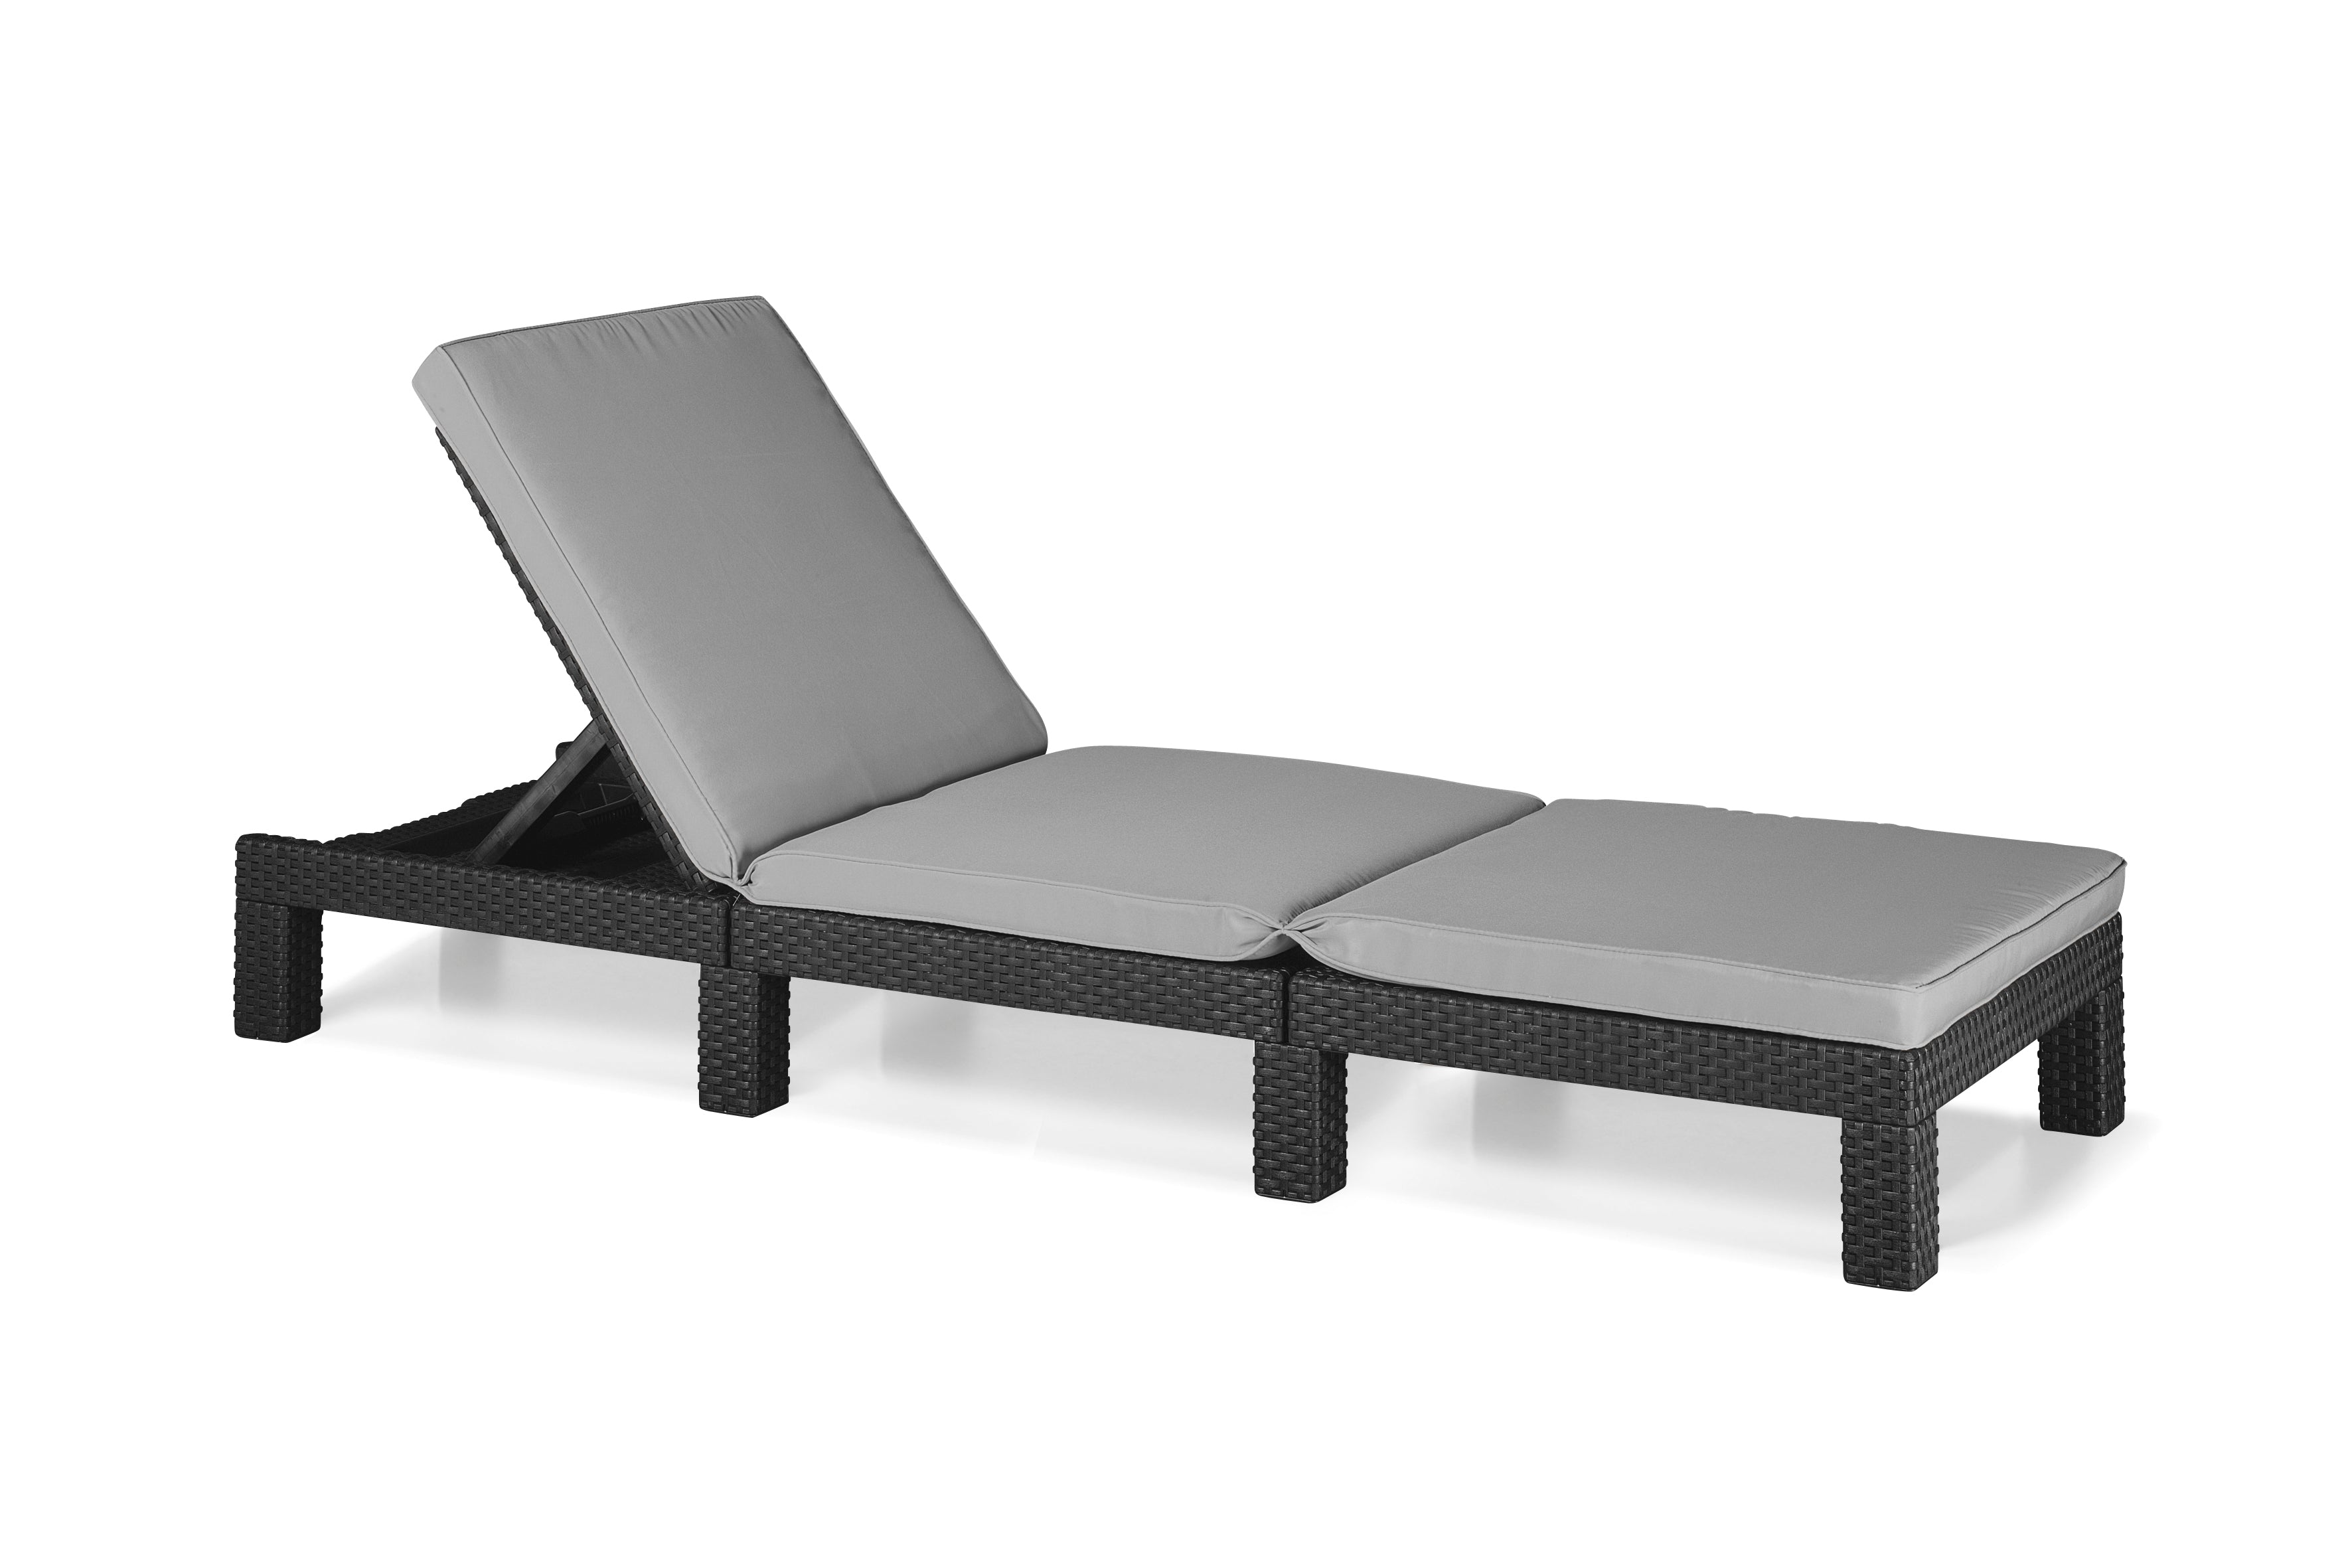 Clear cut image of the Daytona Sun lounger with back rest up